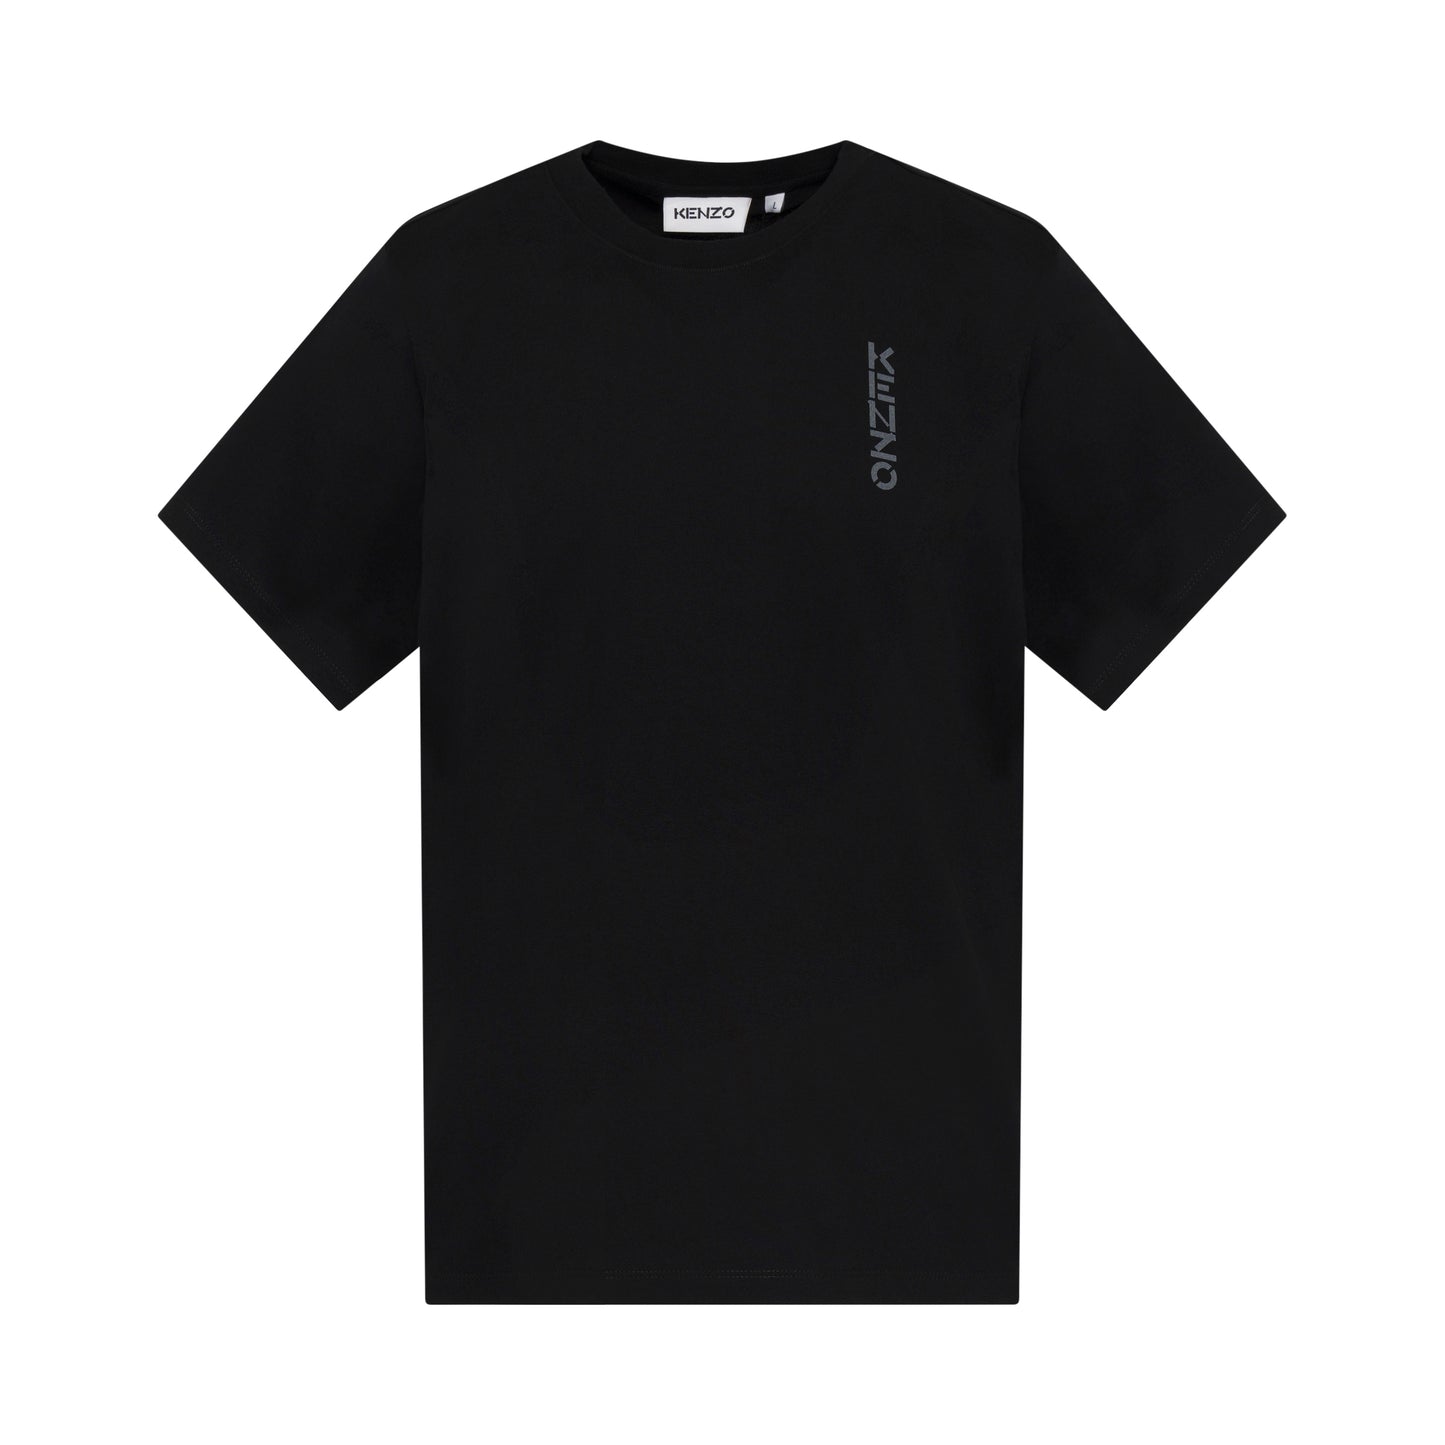 Archive Floral T-Shirt in Black